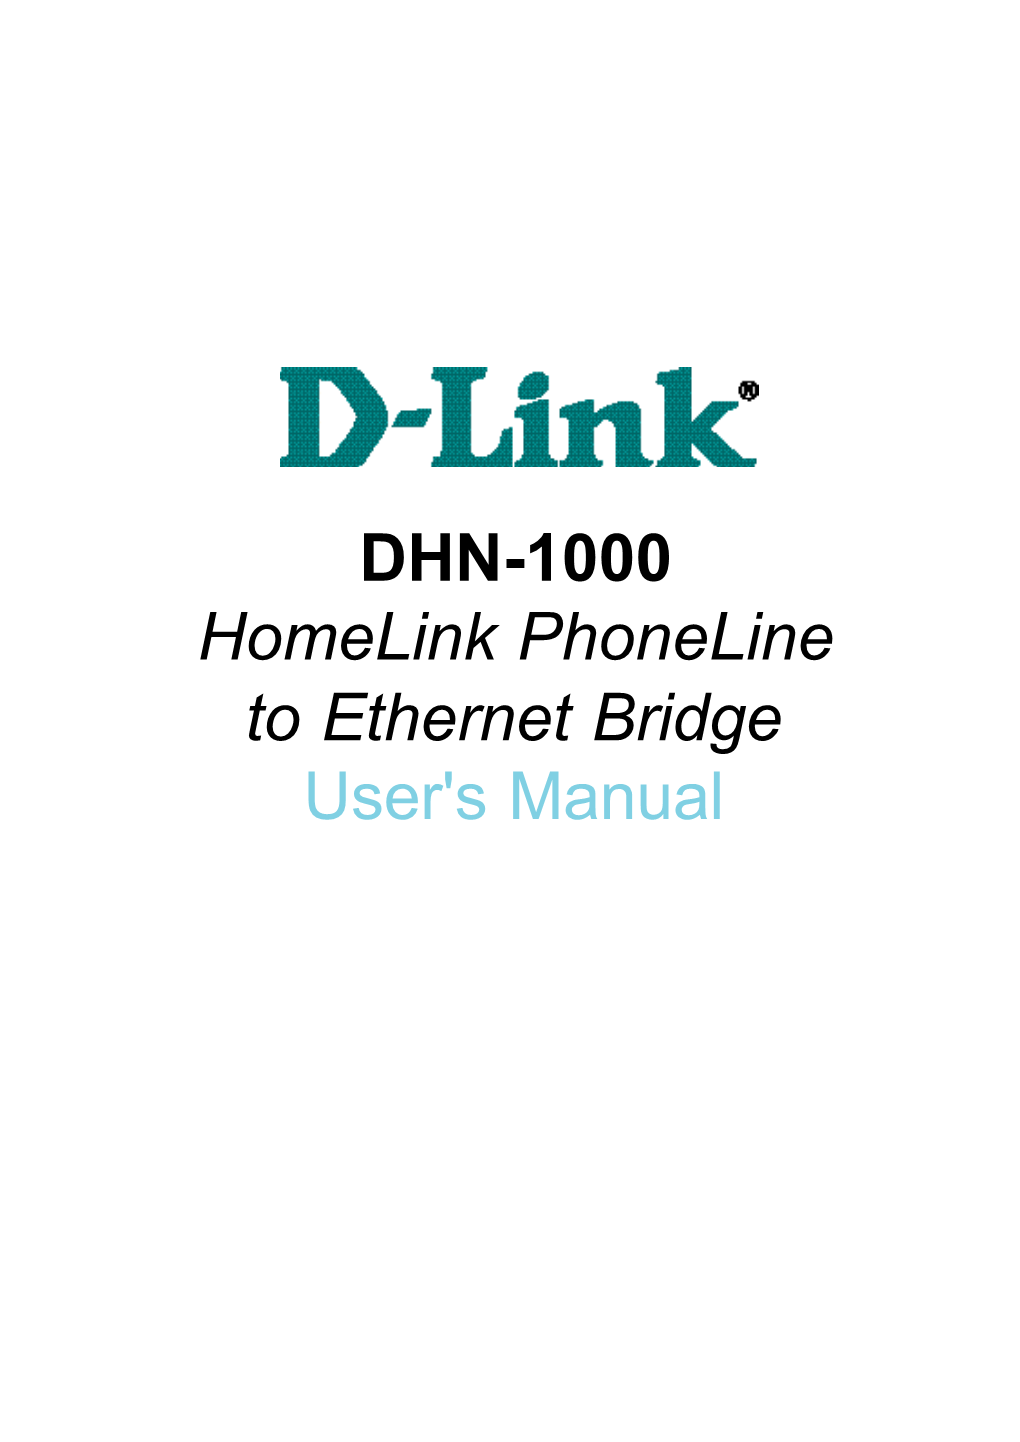 DHN-1000 Homelink Phoneline to Ethernet Bridge User's Manual Table of Contents for the DHN-1000 Homelink Phoneline to Ethernet Bridge